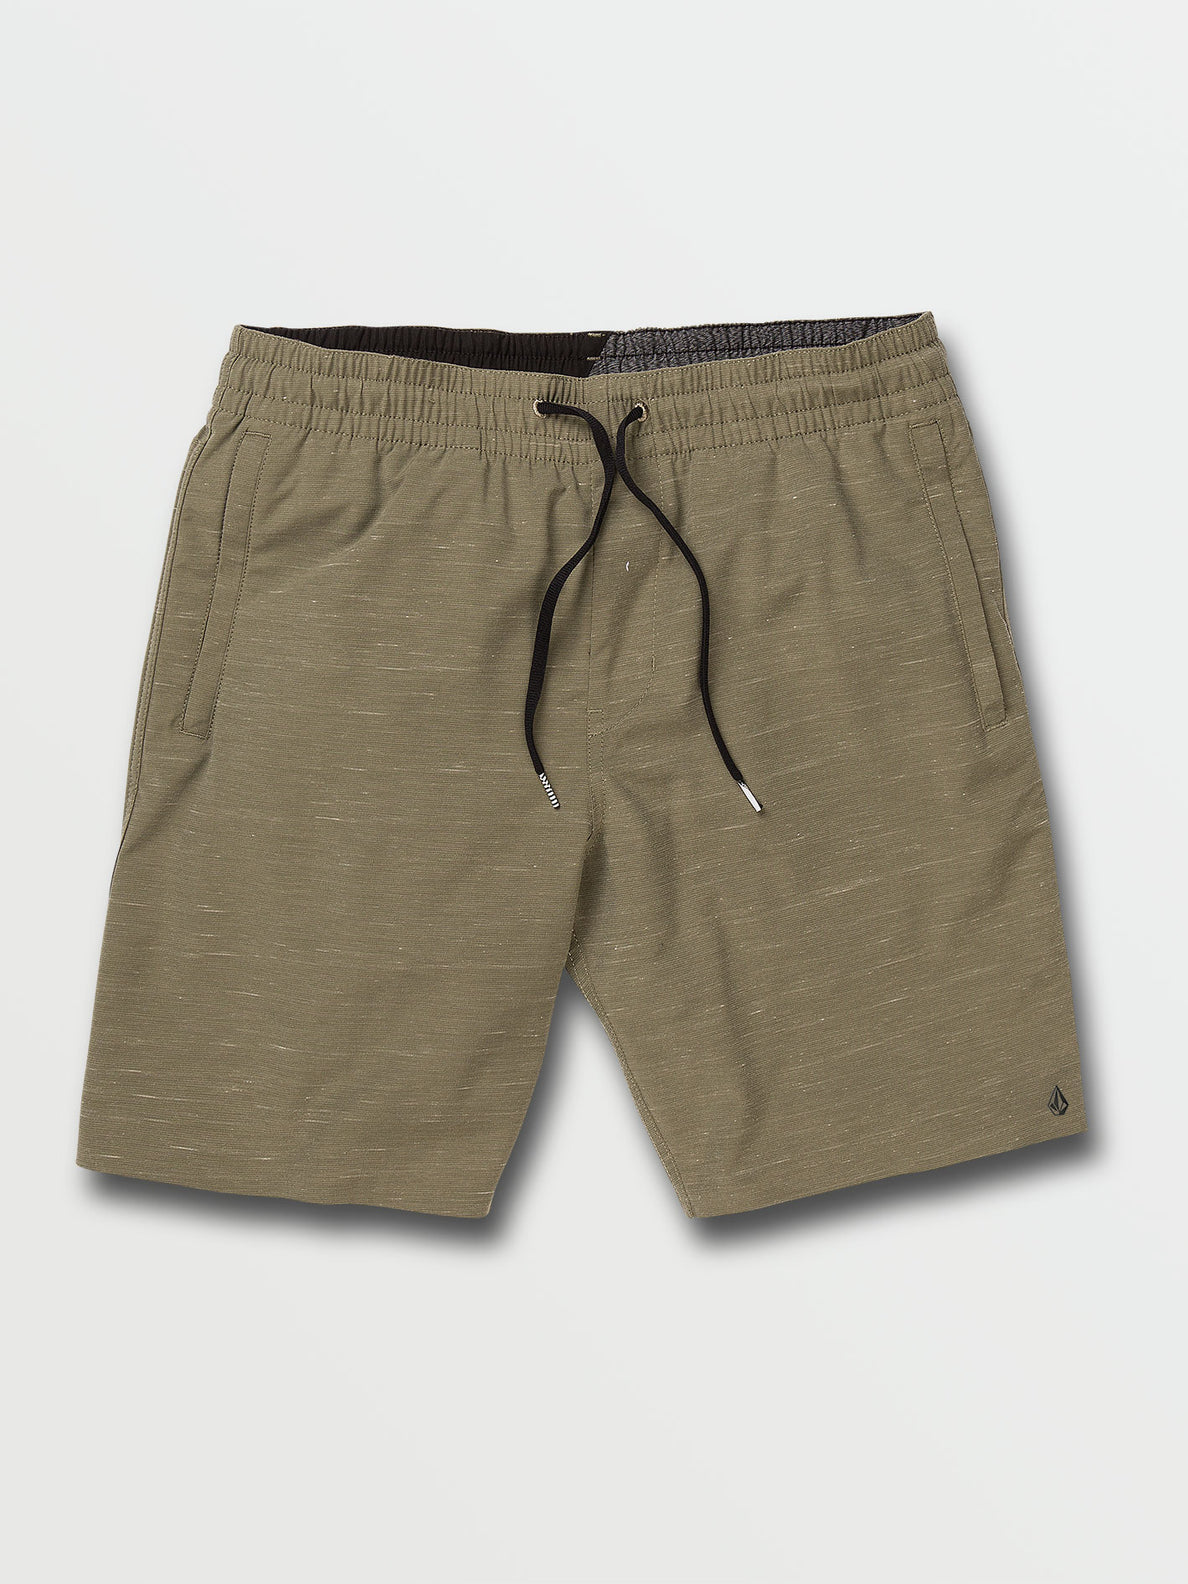 Packasack Lite Hybrid Shorts - Army Green Combo (A3232101_ARC) [F]